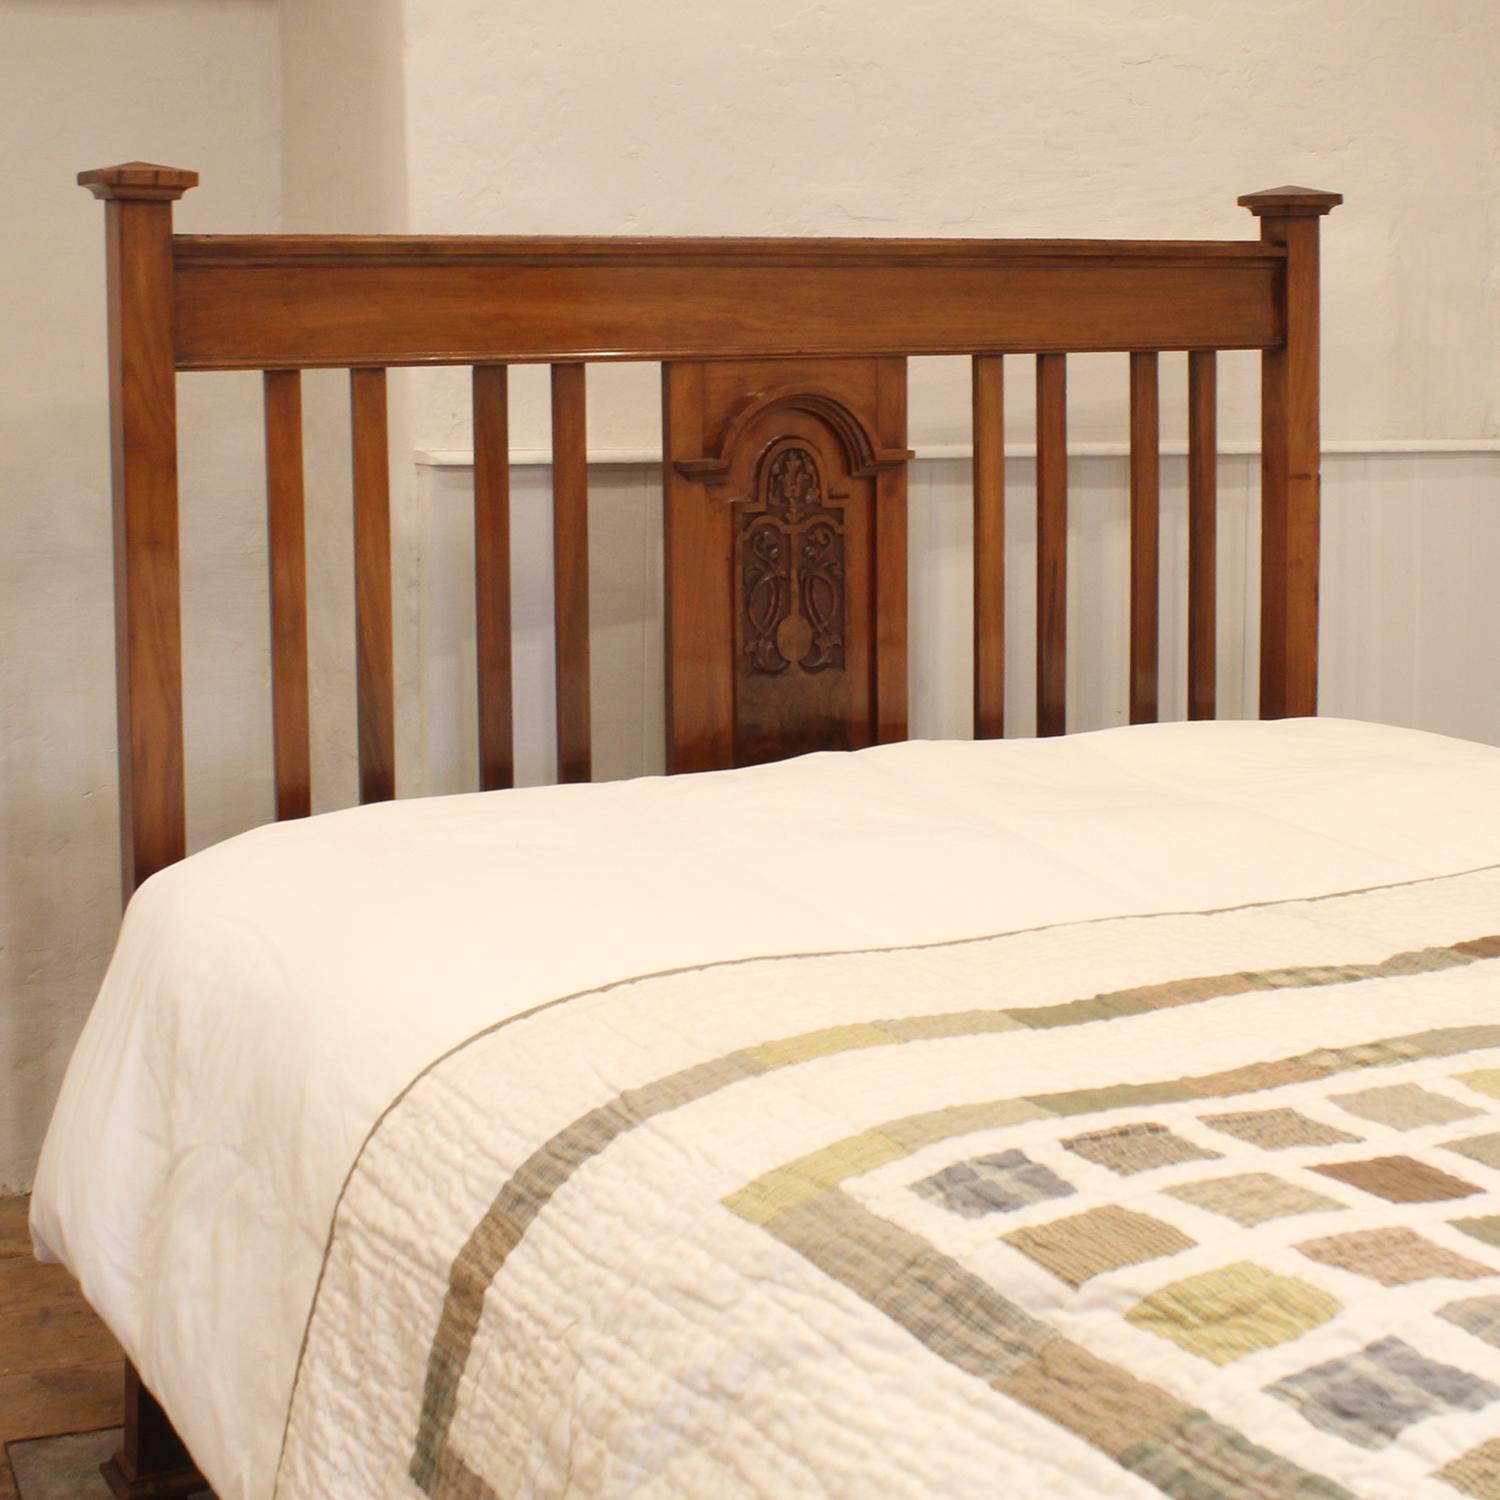 Walnut Edwardian Antique Bed with Pagoda Caps and Carving - WD51 For Sale